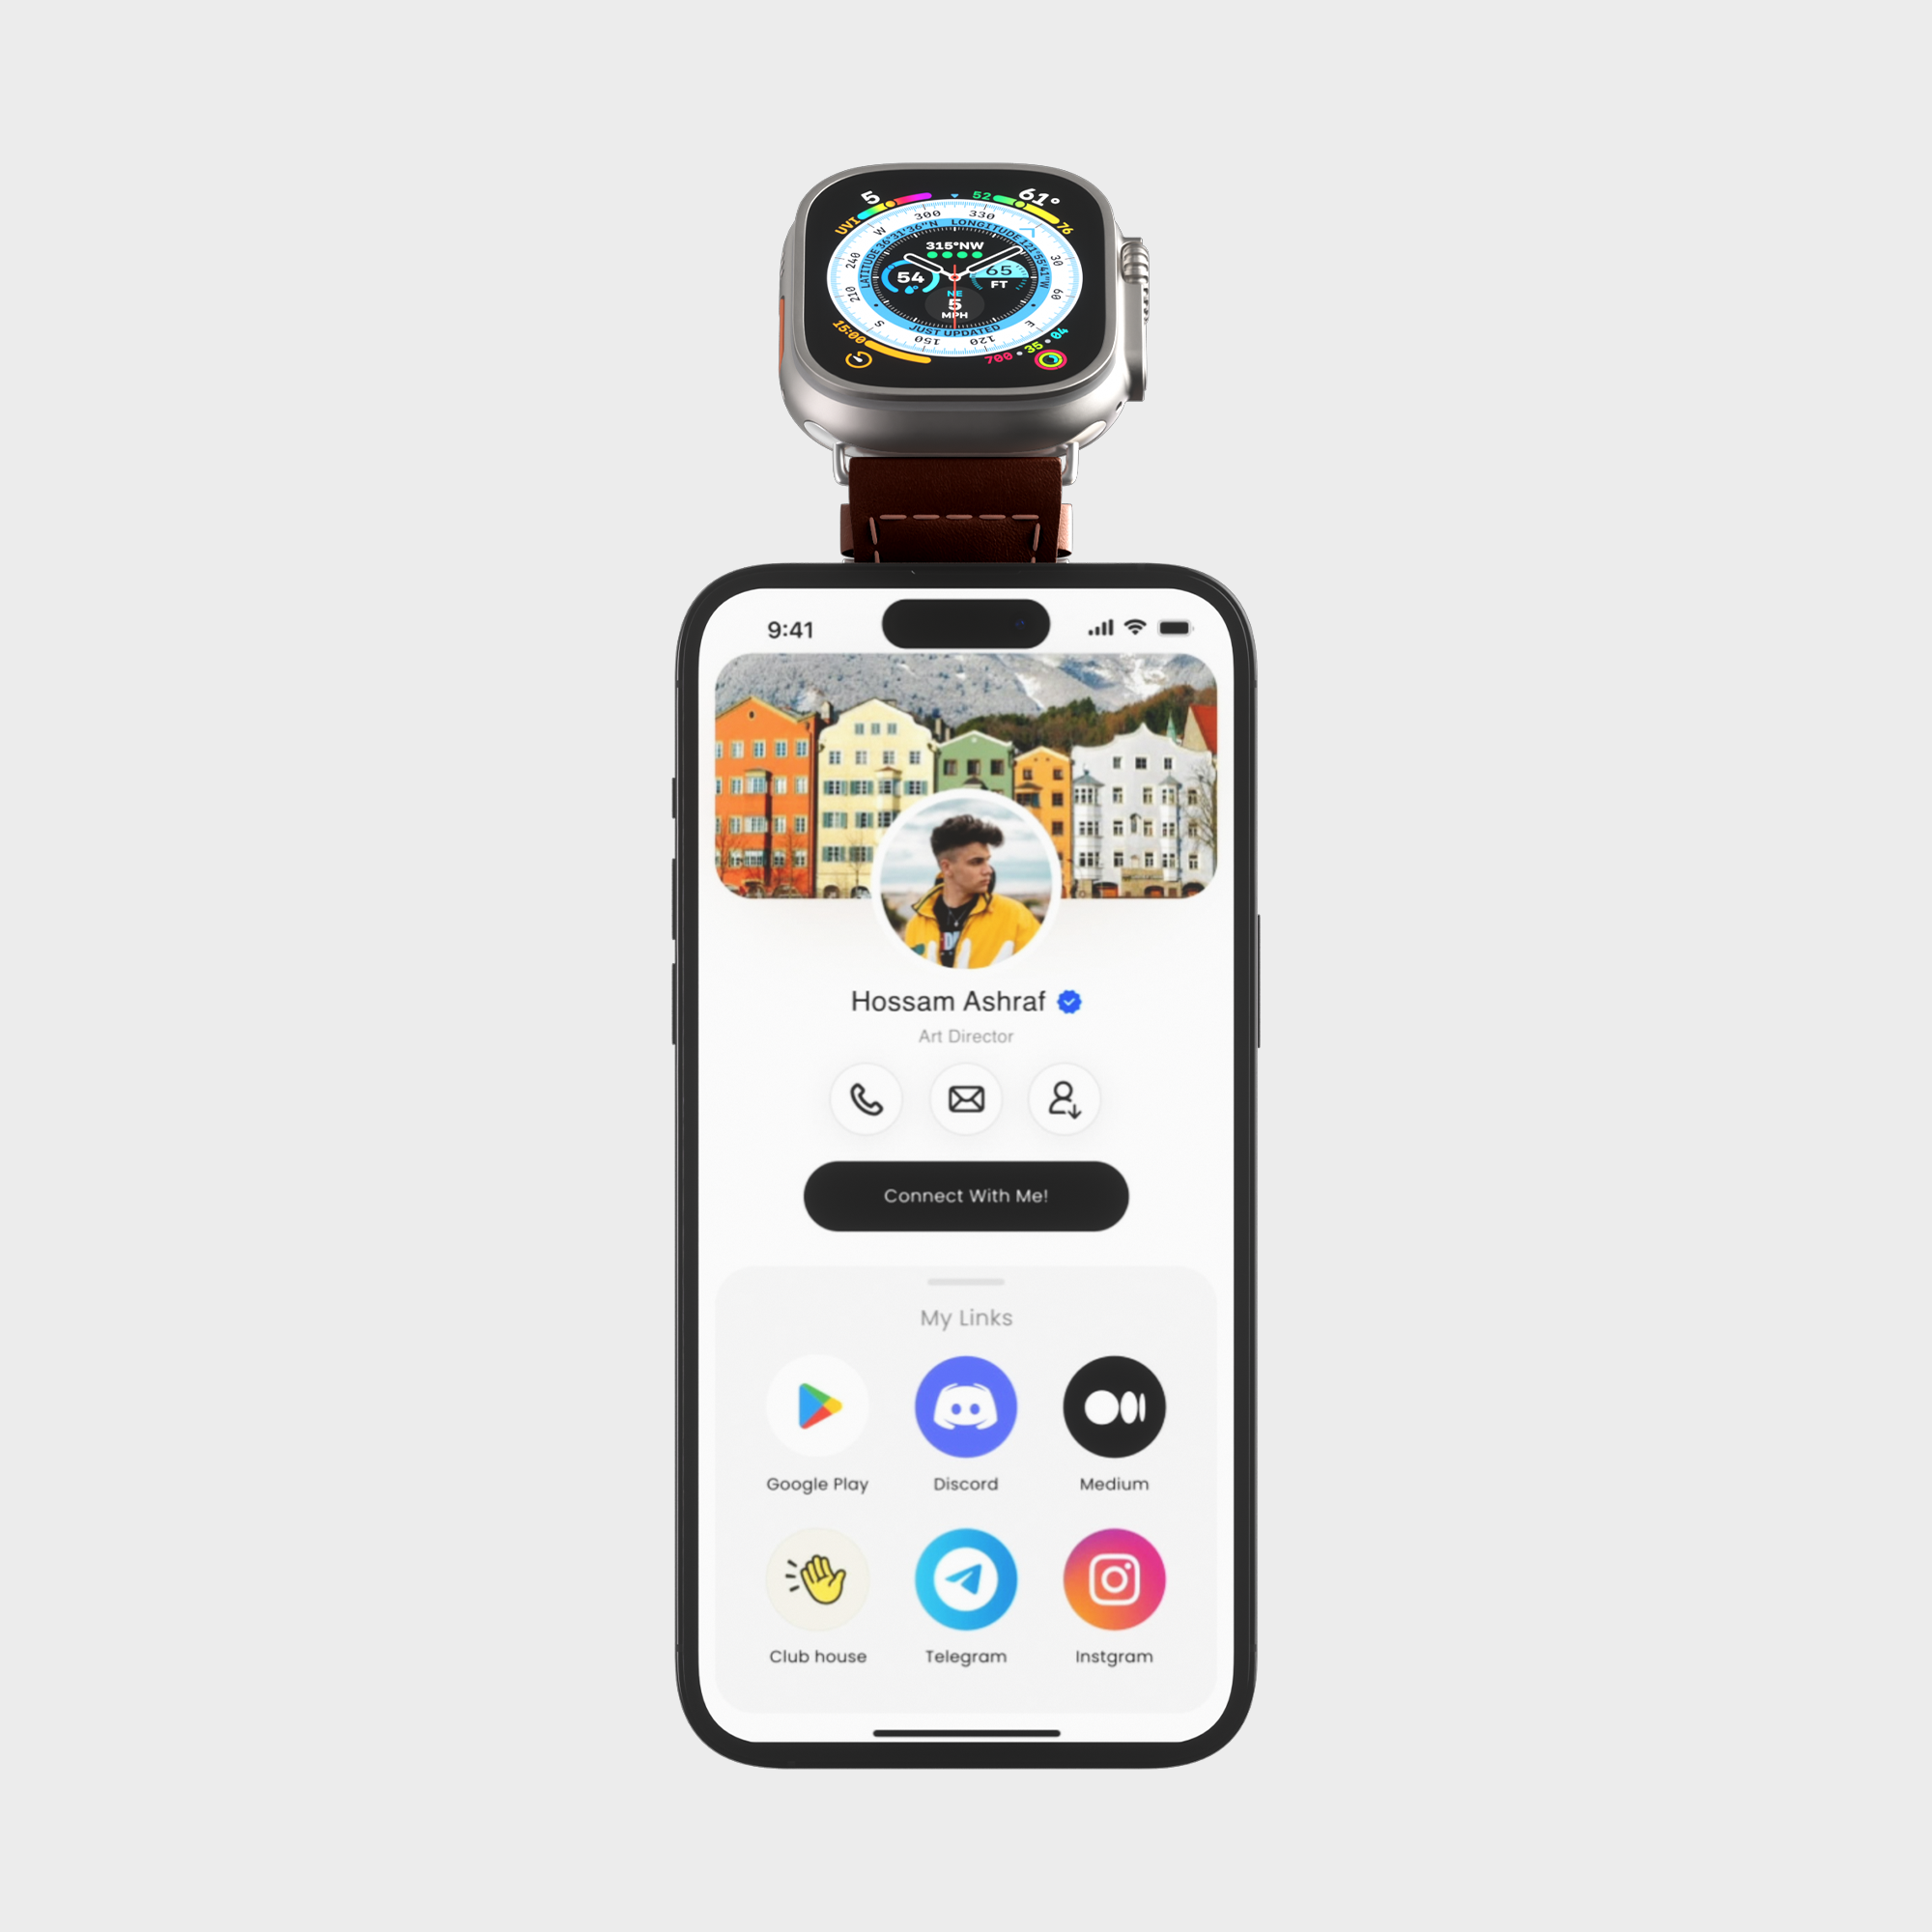 Smartwatch on top of a smartphone showing social media profile and app icons.